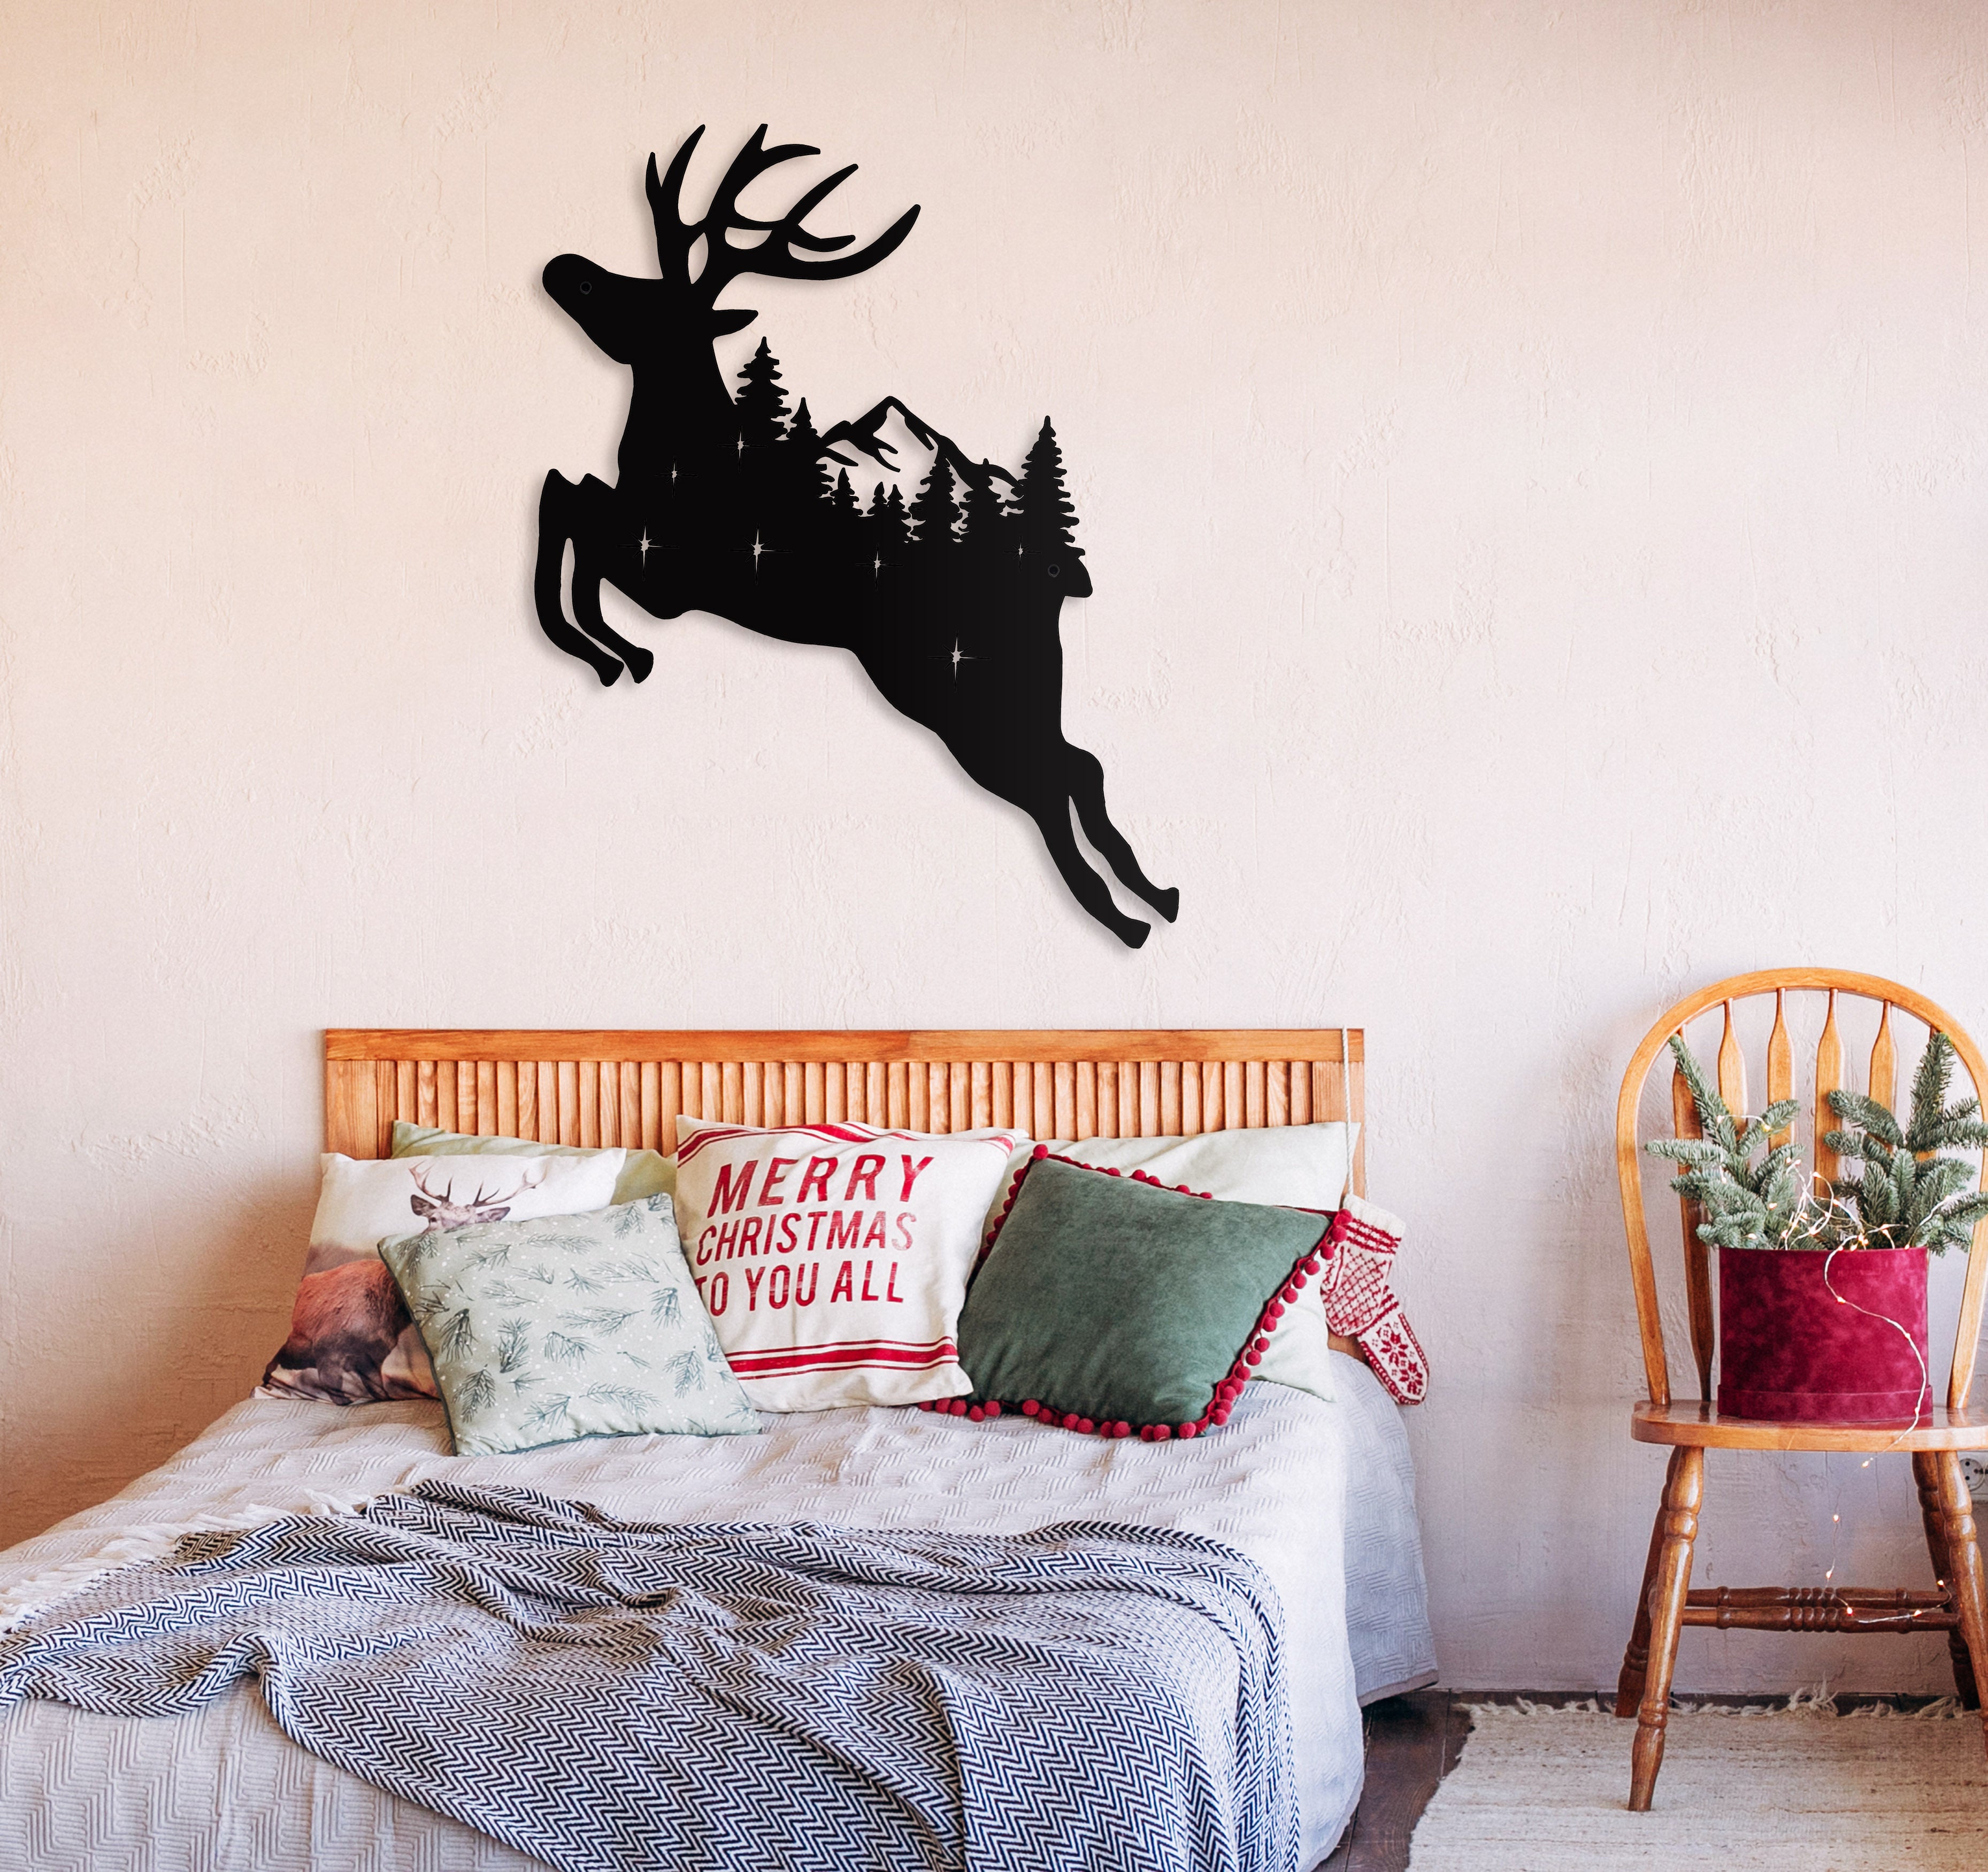 Unique Deer Metal Wall Decor/Living Room Wall Decor Anniversary Gift New Home Gift Wedding Gift